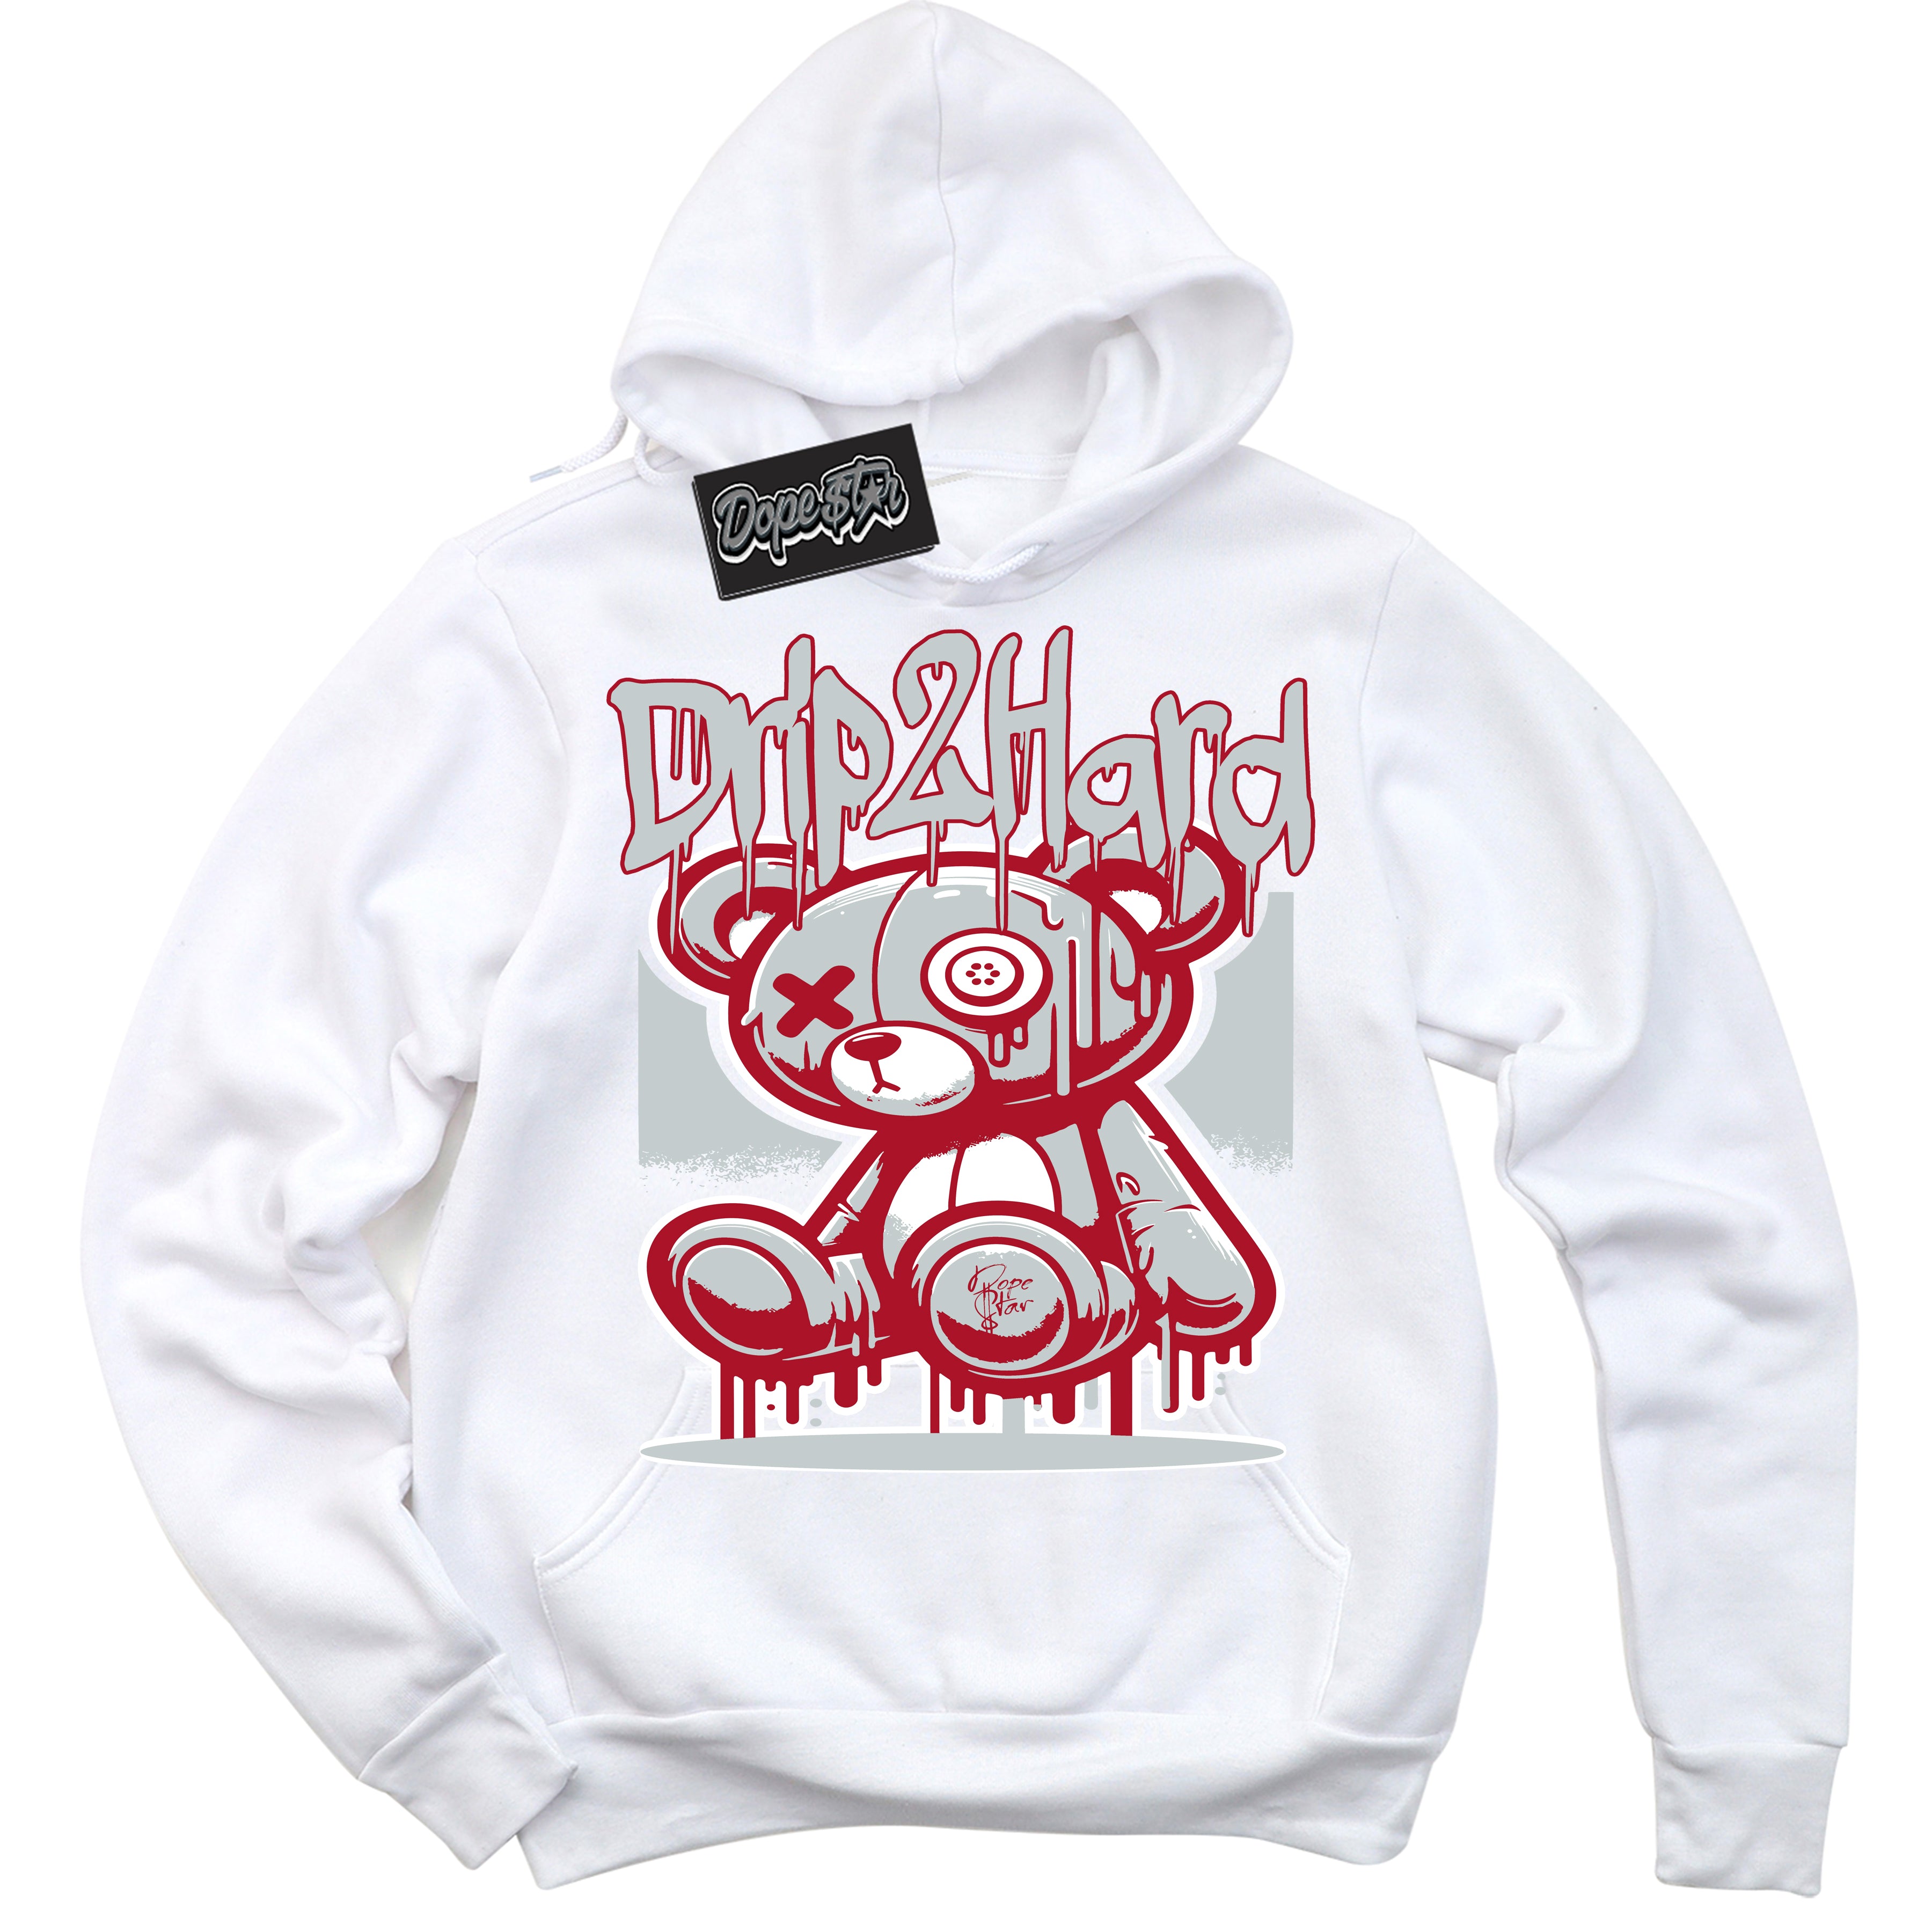 Cool Black Hoodie with “ Drip 2 Hard ”  design that Perfectly Matches  Reverse Ultraman Sneakers.